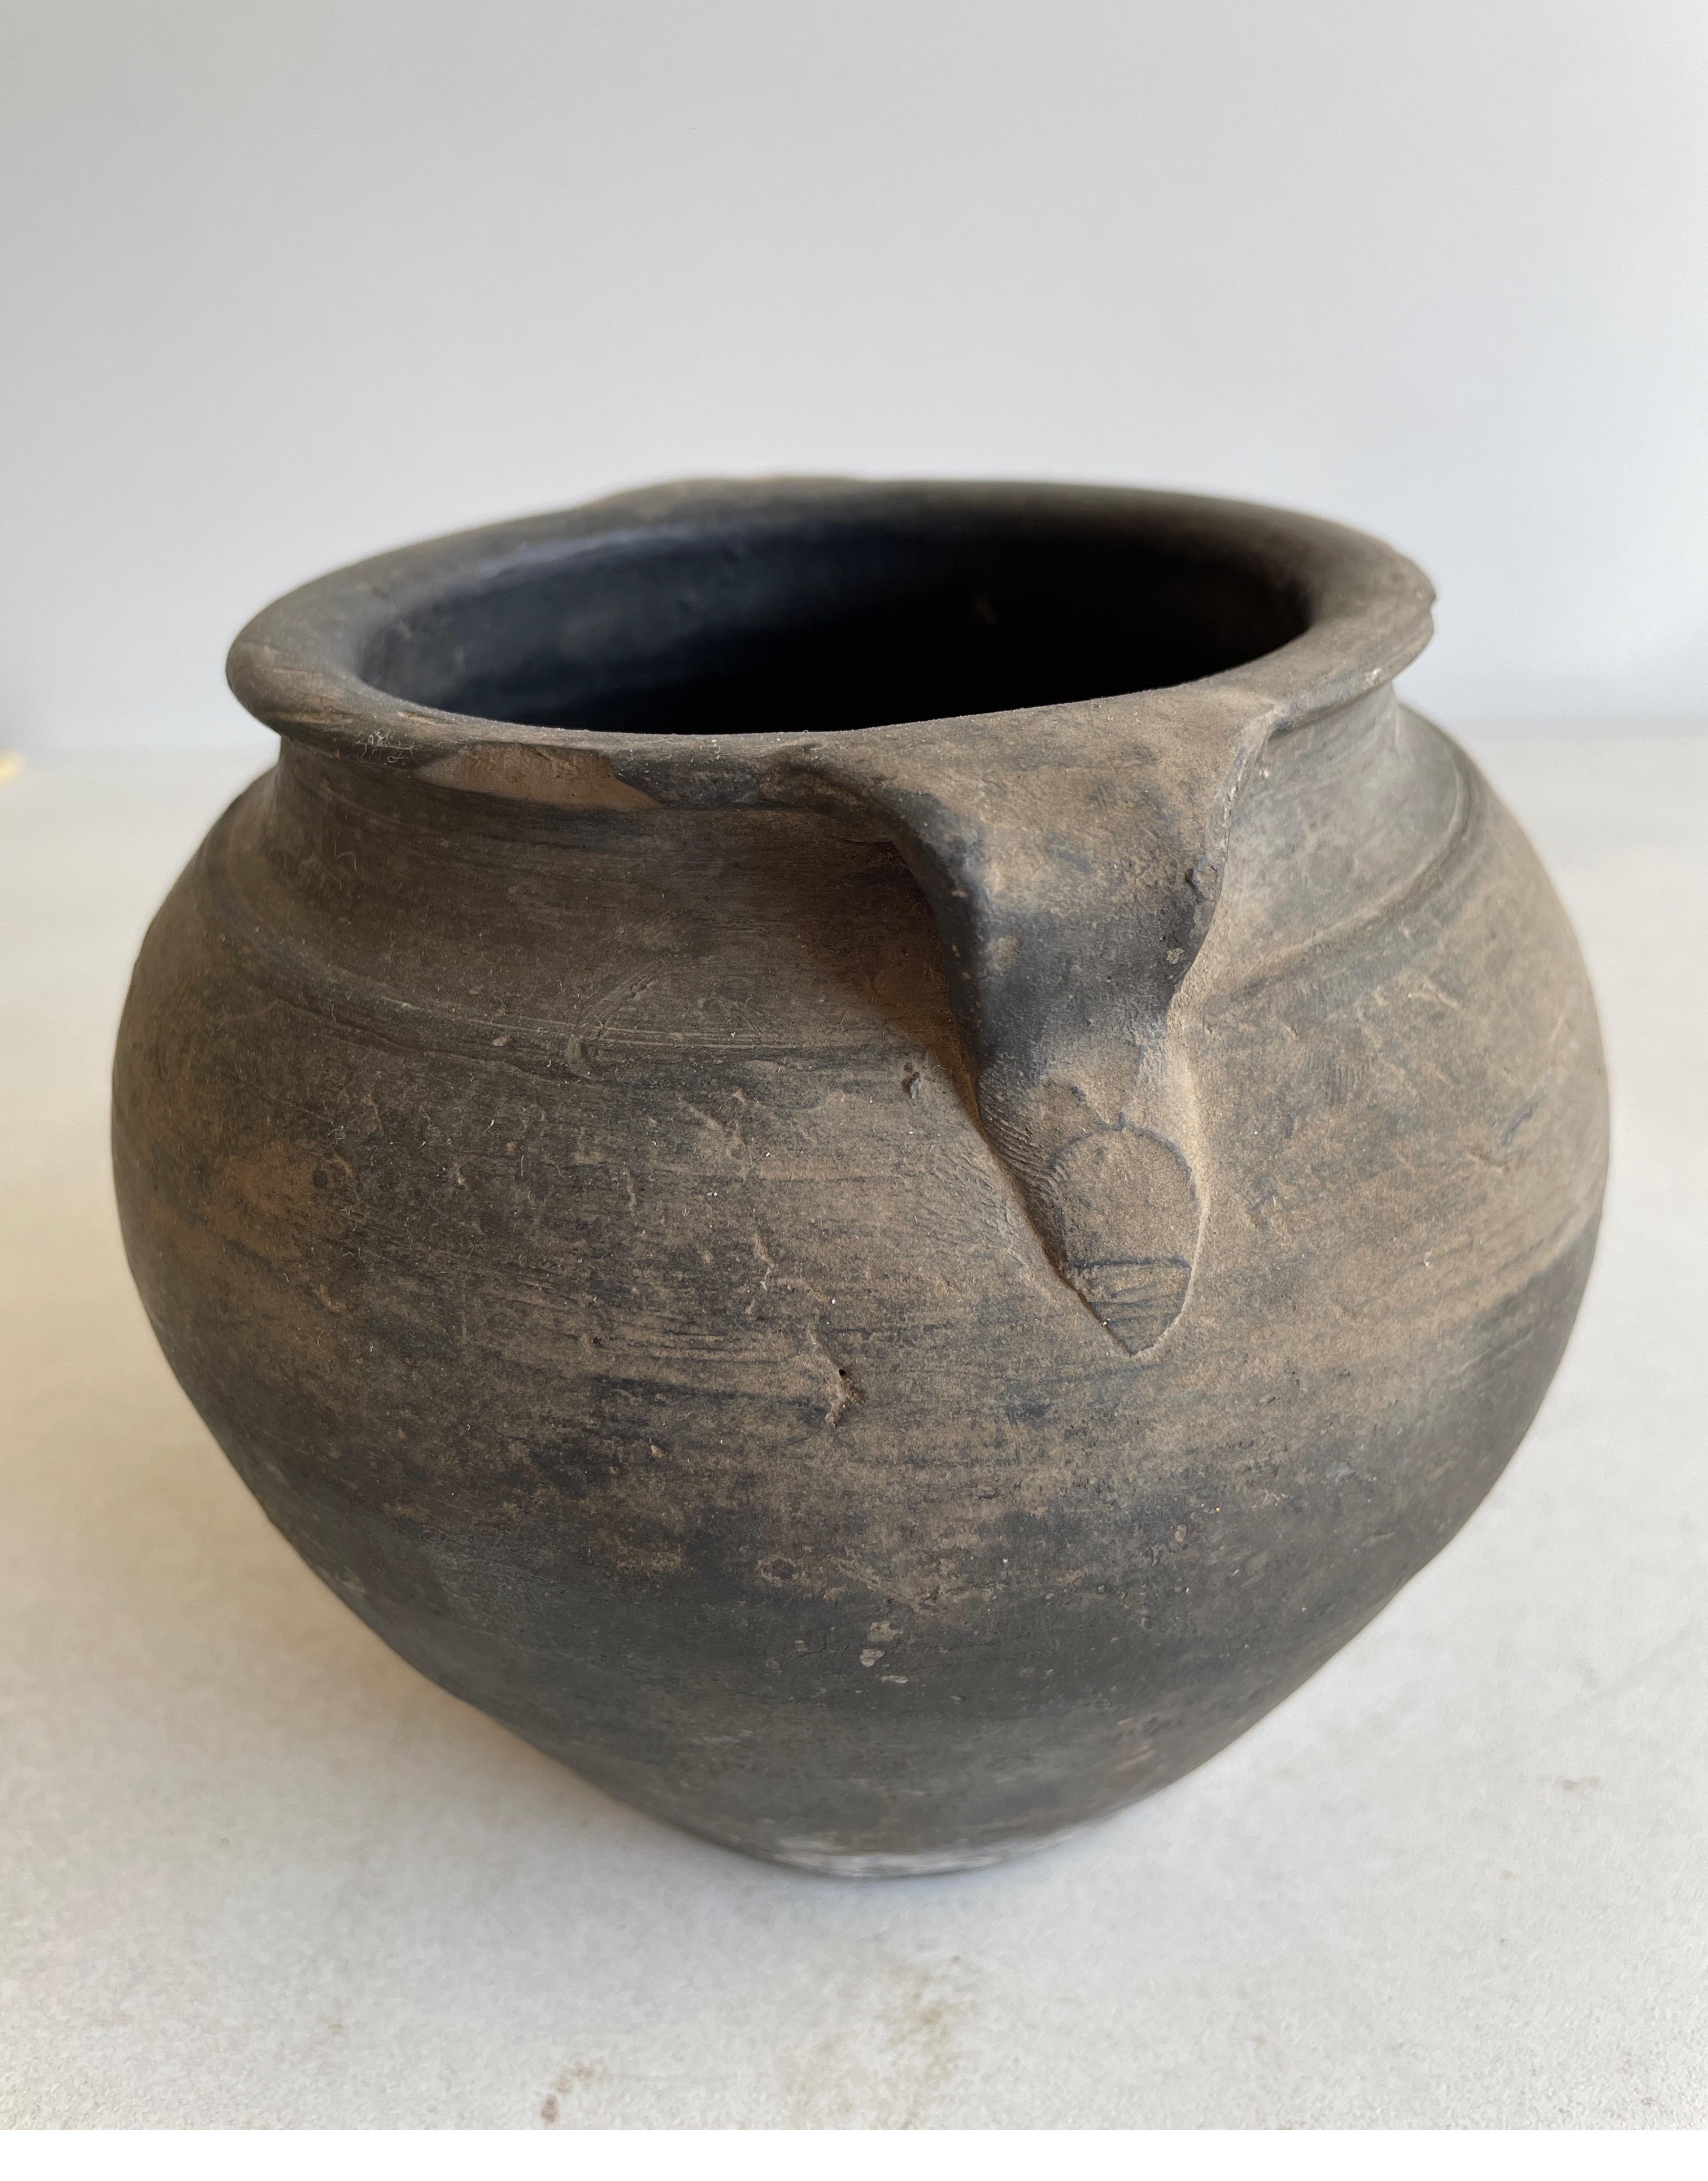 Vintage Matte Oil Pots Pottery beautifully terracotta rich in character, this vintage oil pot adds just the right amount of texture + warmth where you need it. Stunning matte finish with warm terra-cotta accents, and dark grey tones. Each piece is